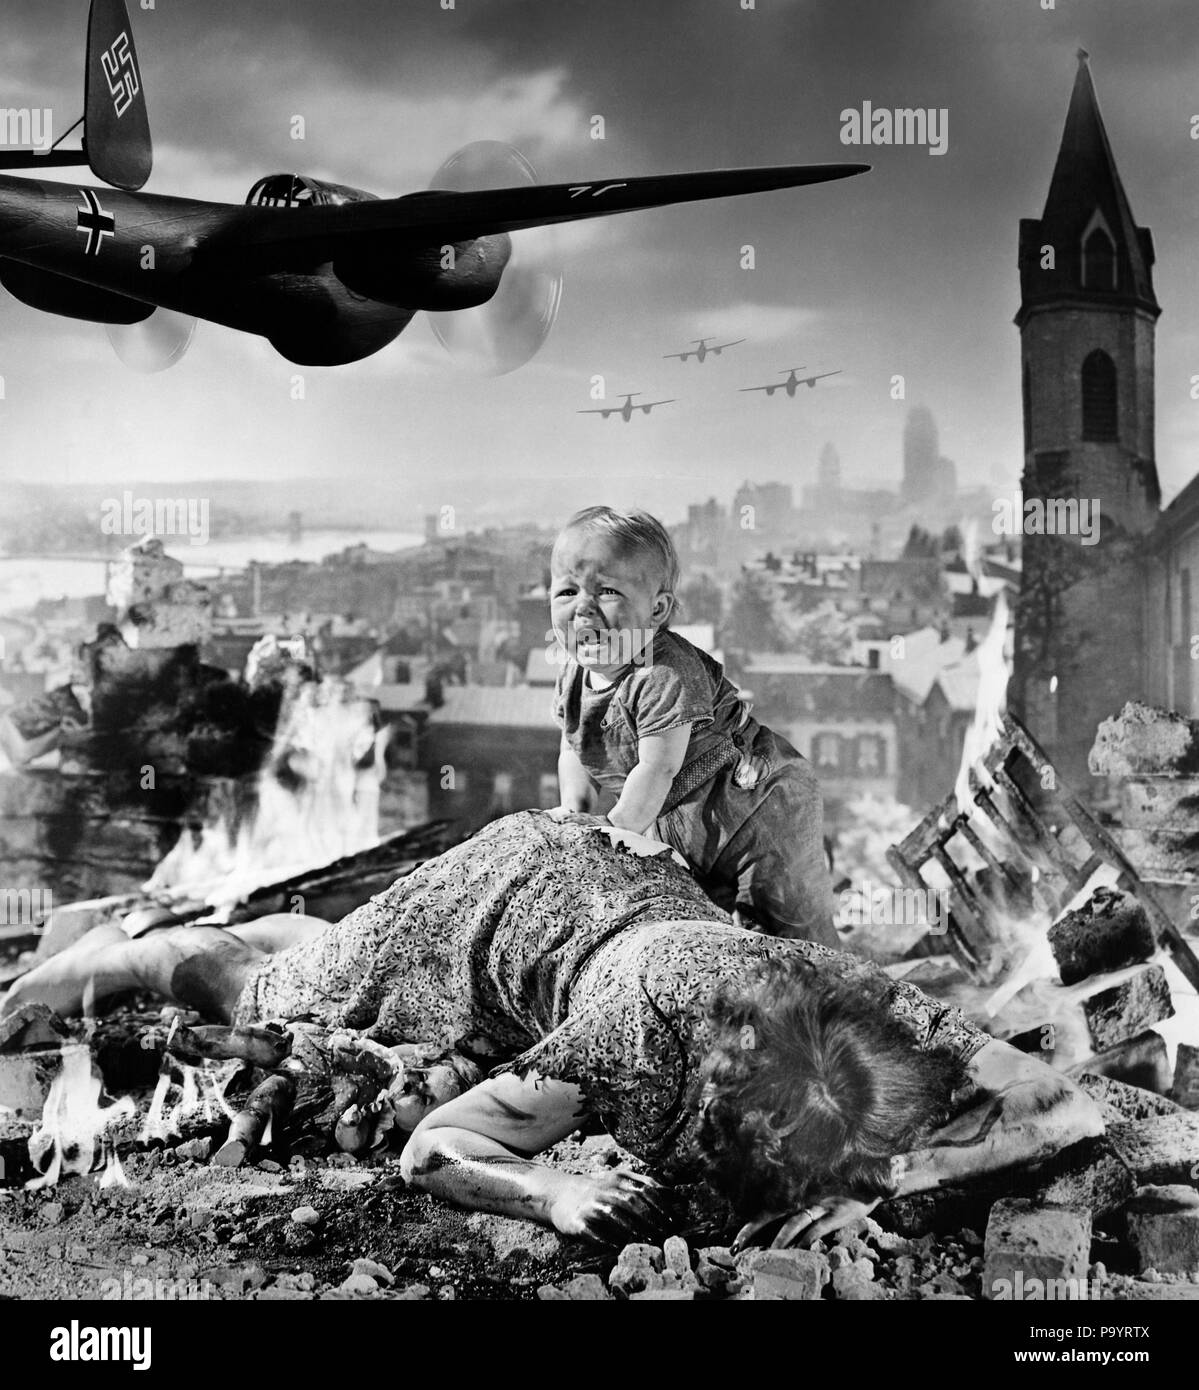 1940s WORLD WAR II BLITZKRIEG MONTAGE NAZI BOMBER PLANES FLYING OVER CITY RUBBLE CRYING BABY INJURED DEAD MOTHER - asp x11802 CAM001 HARS MONTAGE INFANT LIFESTYLE PLANES HISTORY FEMALES INJURED WW2 HOME LIFE COPY SPACE HALF-LENGTH PERSONS CRY II RISK DEAD TRANSPORTATION B&W SADNESS DISASTER VICTIM AIRPLANES DEATH DESTRUCTION COMPOSITE DYING EXCITEMENT WORLD WARS BOMBER CAM001 WORLD WAR WORLD WAR TWO BOMBING AVIATION BOMBS ORPHAN ORPHANS CONCEPTUAL ESCAPE NAZI VICTIMS JUVENILES MID-ADULT MID-ADULT WOMAN MOMS RUINS YOUNG ADULT WOMAN BLACK AND WHITE CAUCASIAN ETHNICITY OLD FASHIONED RUBBLE Stock Photo